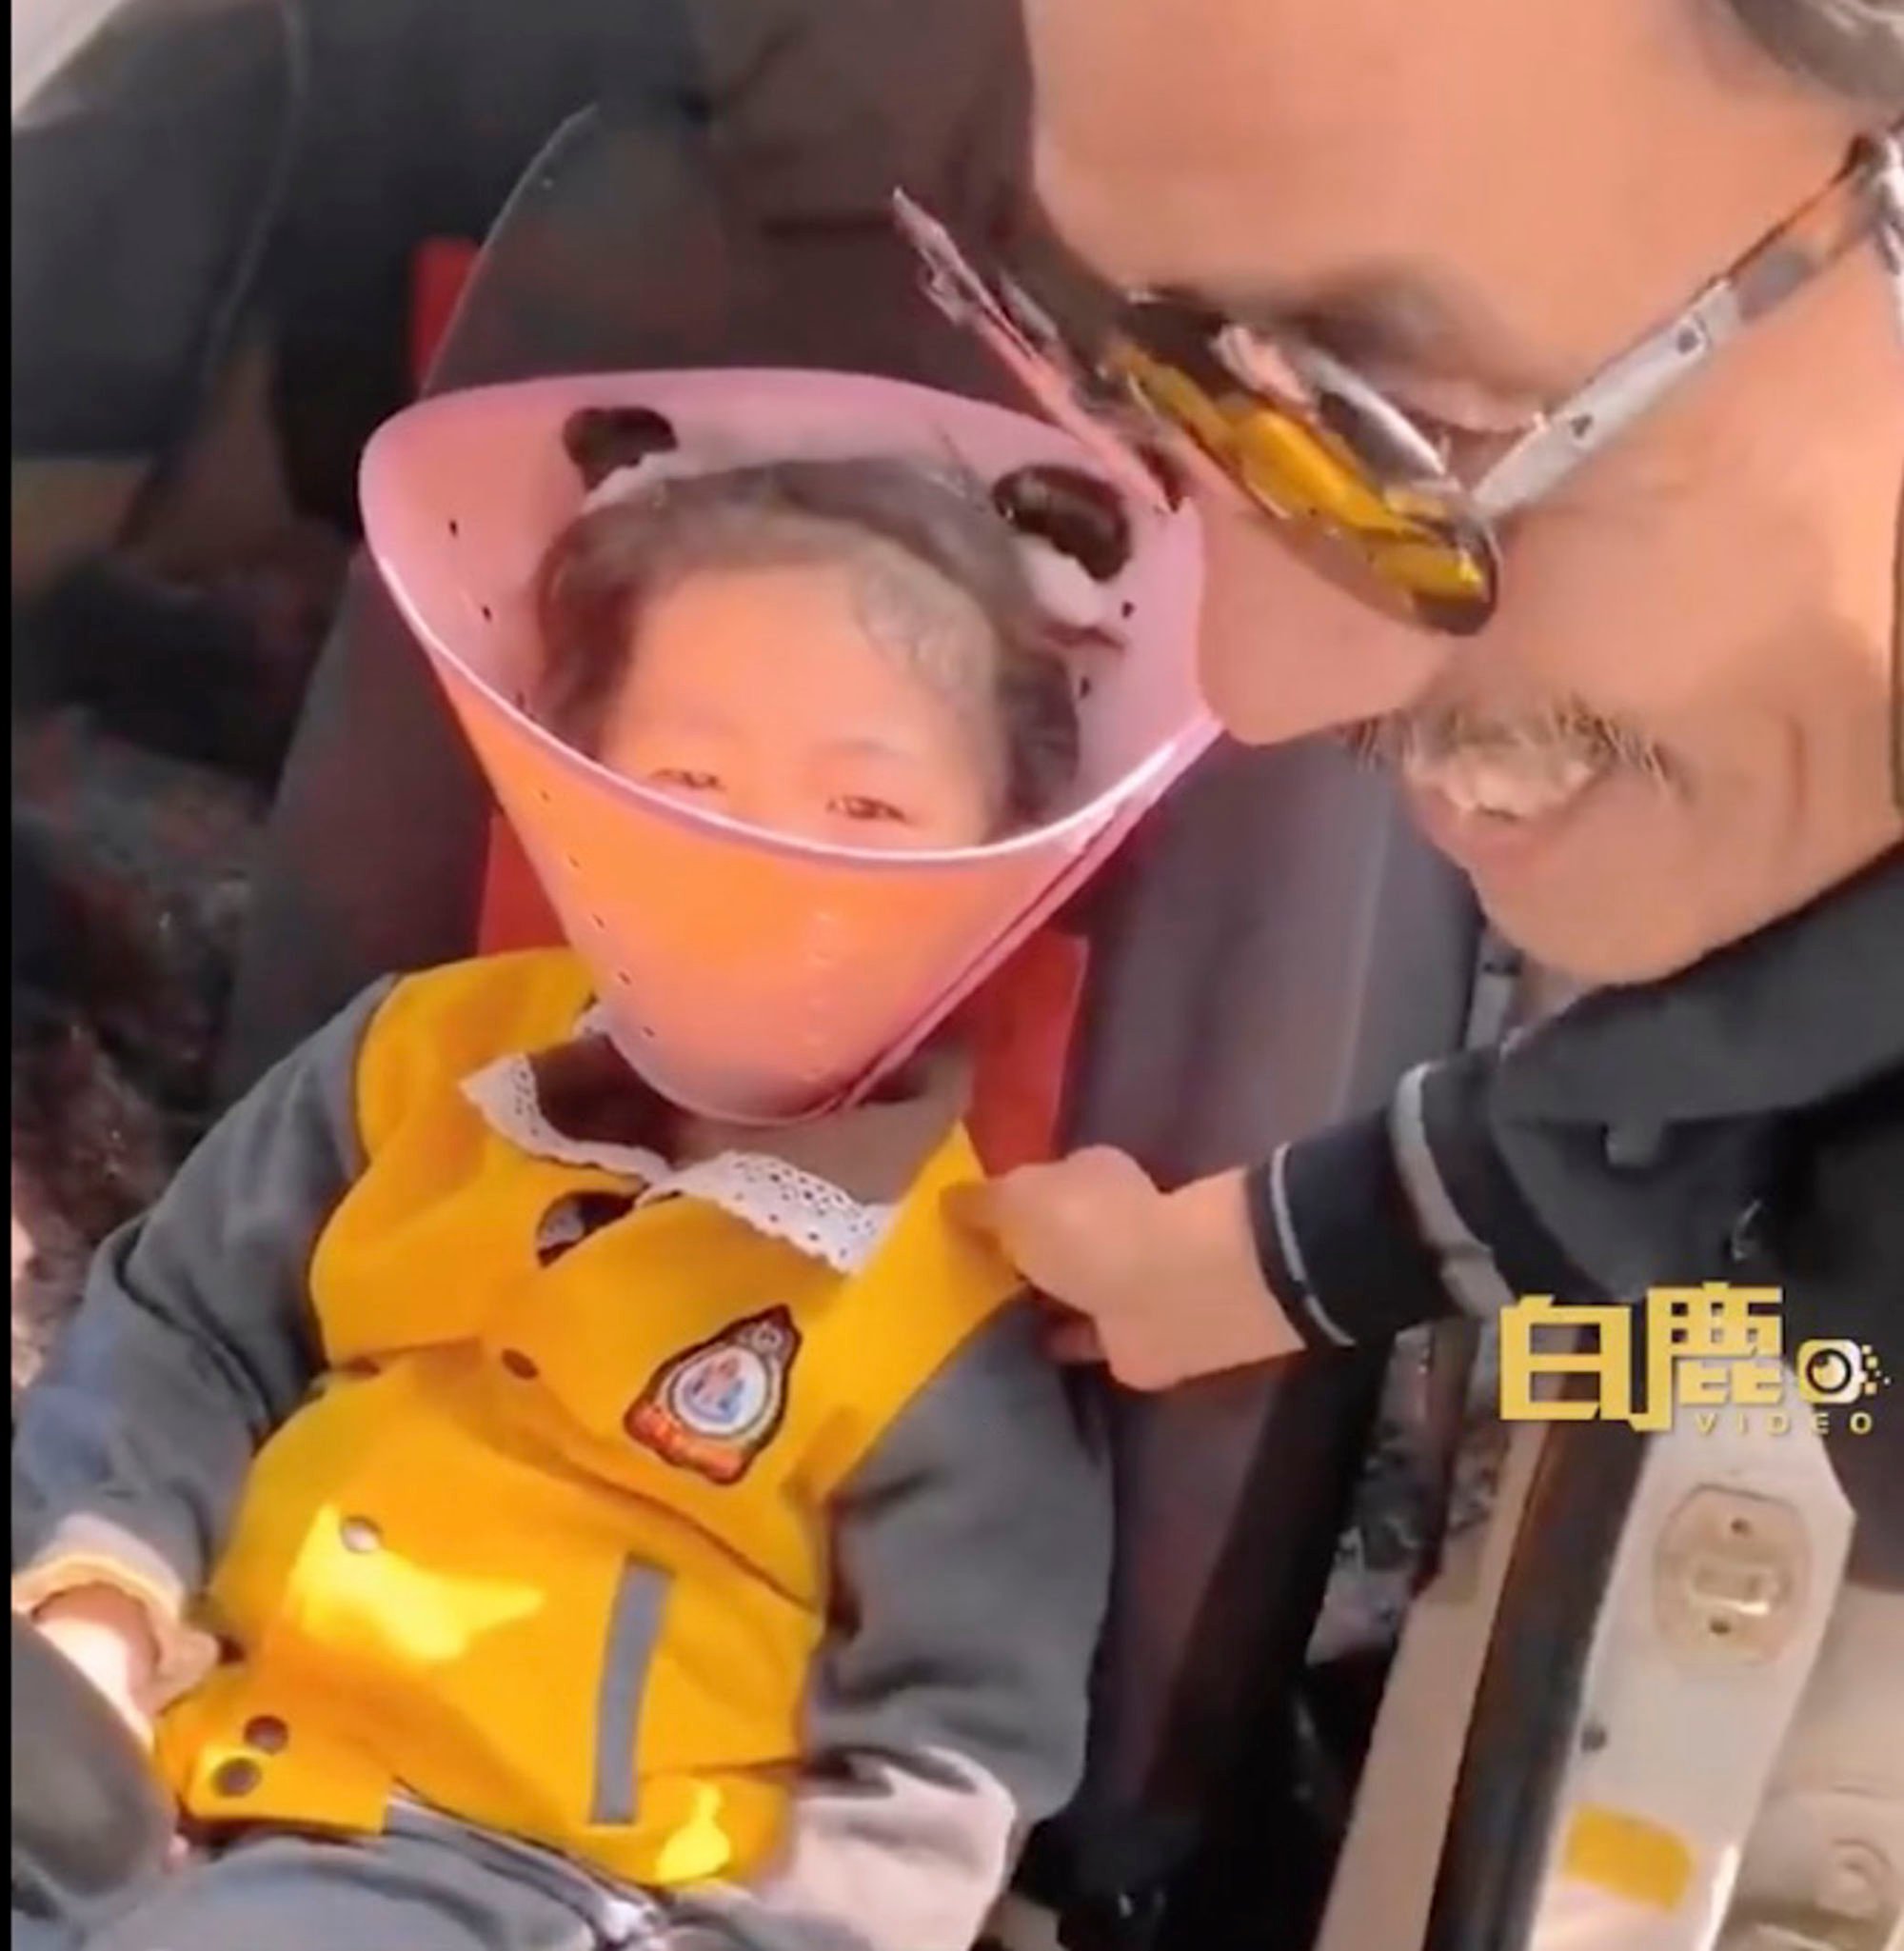 A grandfather’s creative solution to limit his granddaughter’s excessive phone use sparked discussion and entertained many online. Photo: Weibo